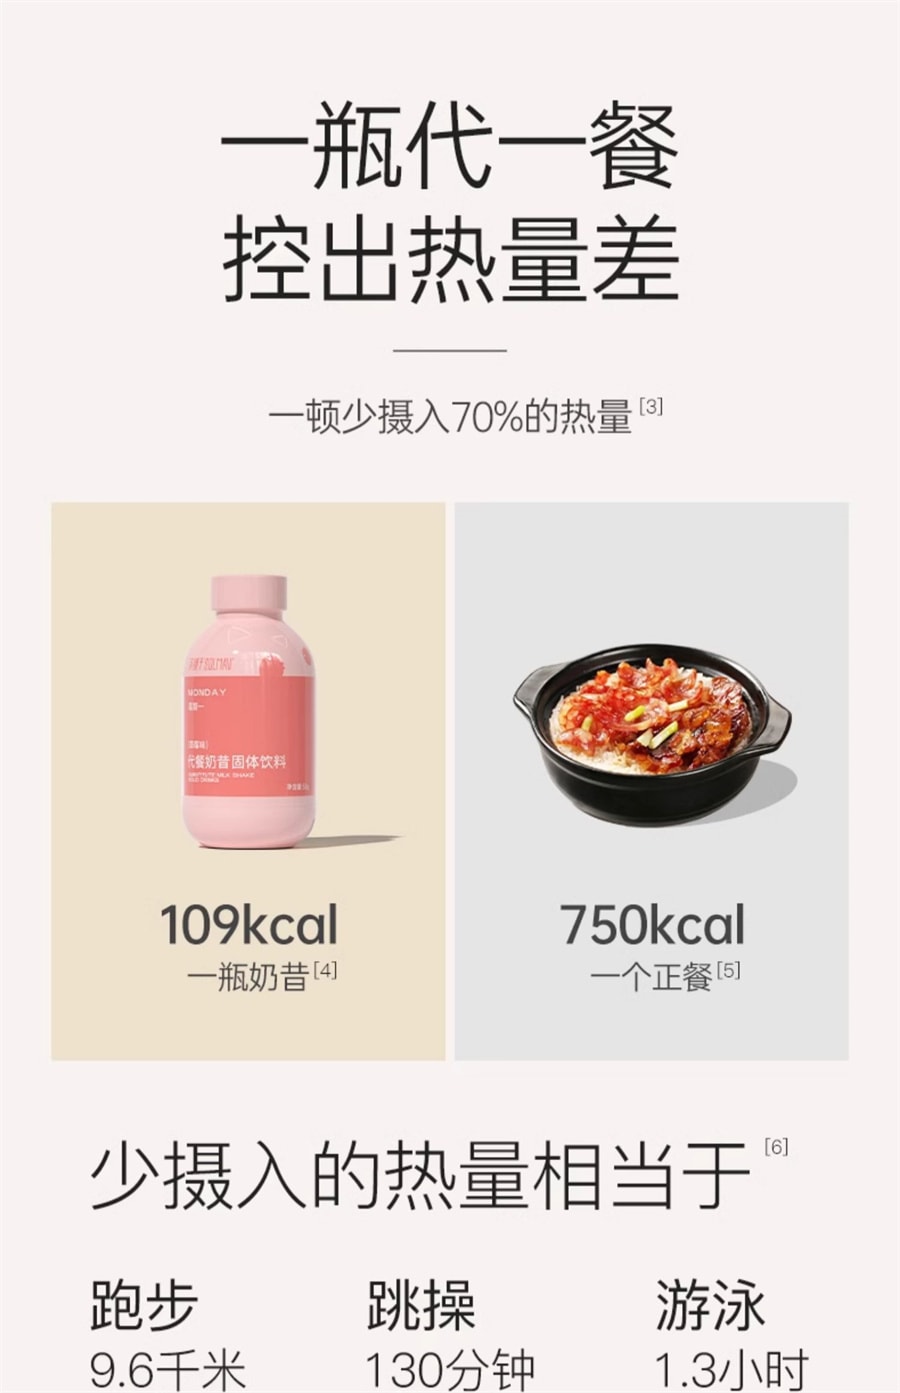 Meal Replacement Shake Nutritional Satiety Food Staple Breakfast Dinner Meal Replacement Powder Drink Milk Tea 10